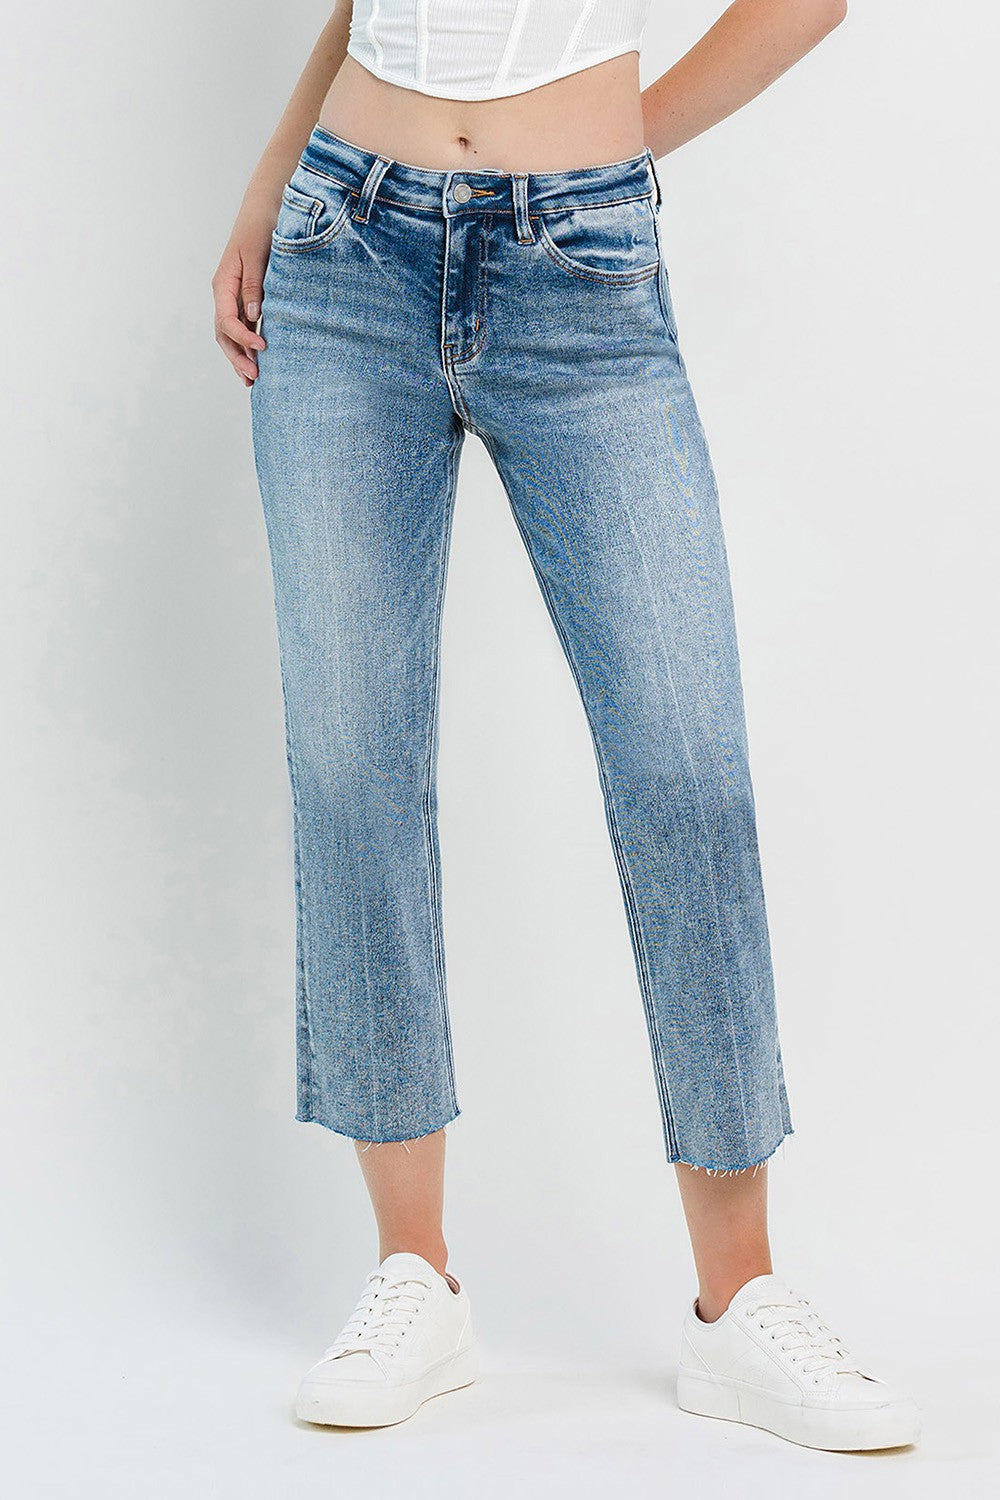 River Dee High Rise Straight Jeans by Vervet